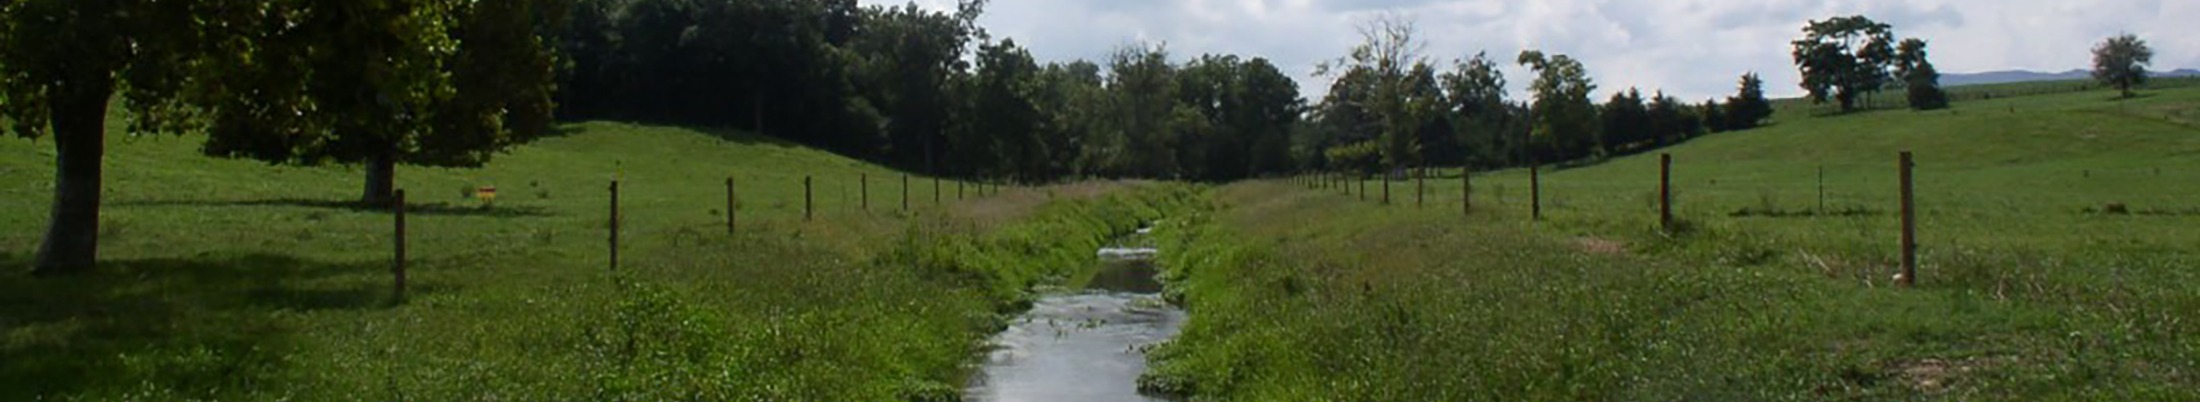 A small stream running through a field with a fence on either side and a hardwood tree in the foreground.